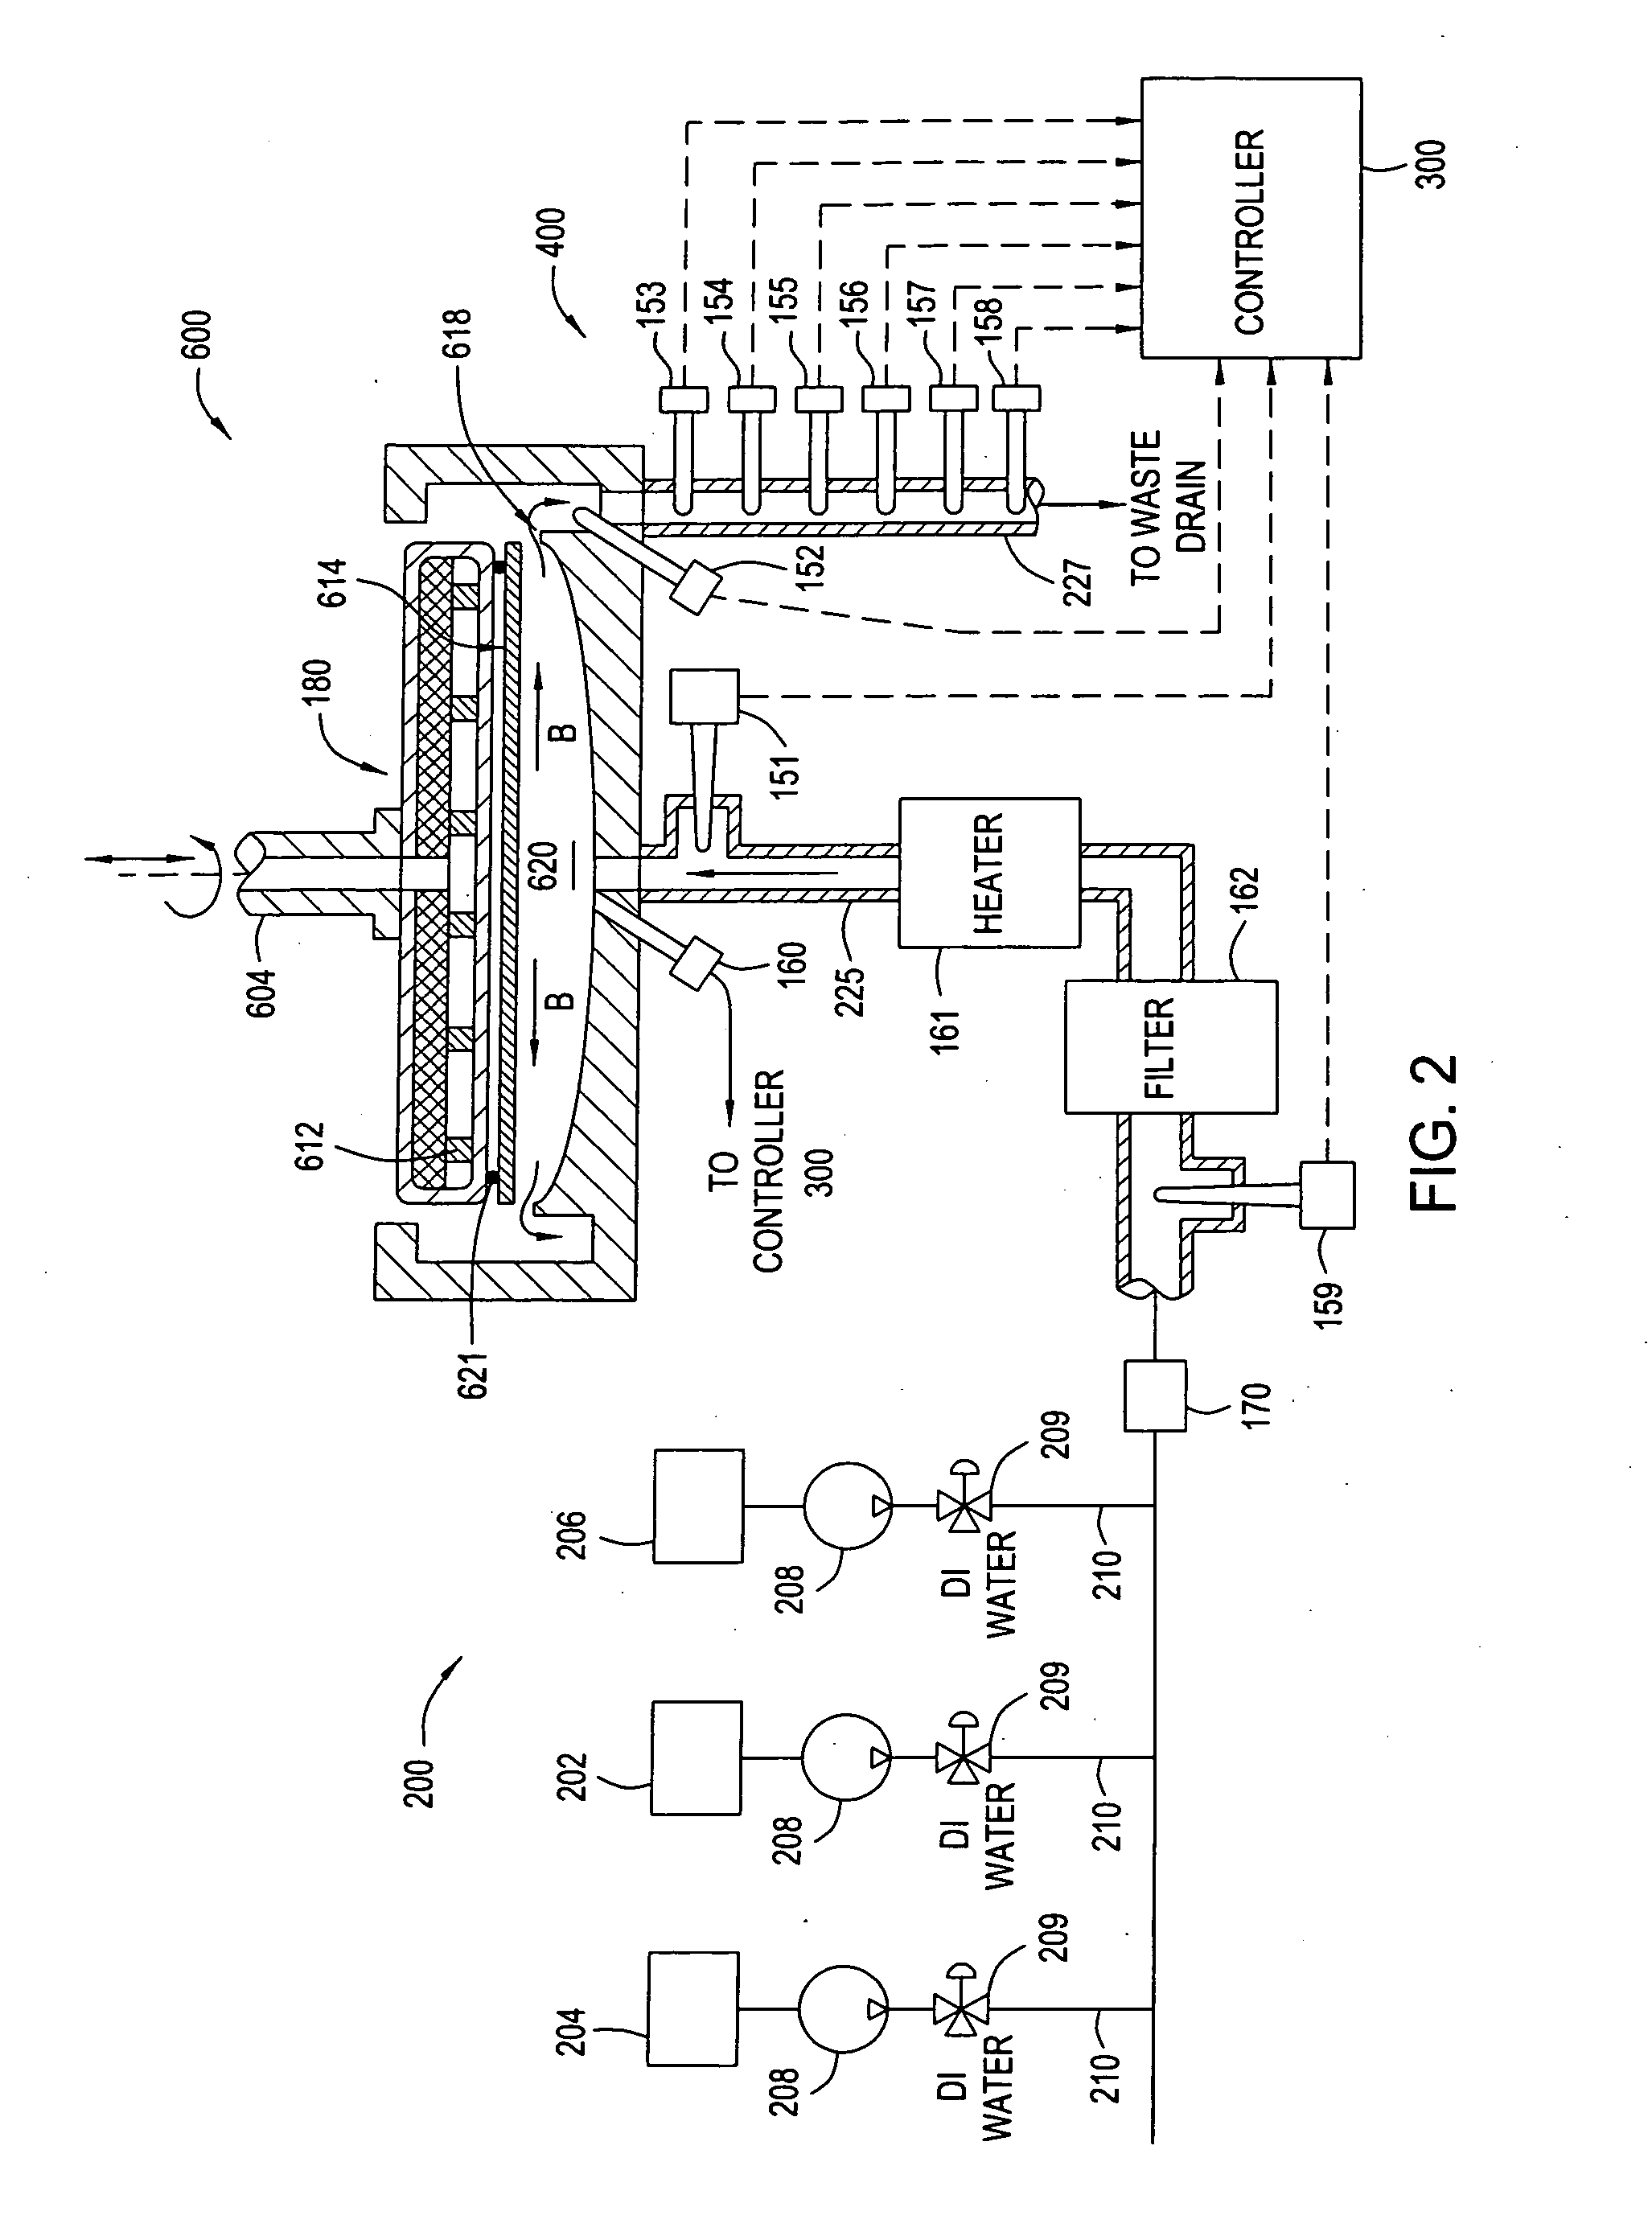 Measurement techniques for controlling aspects of a electroless deposition process